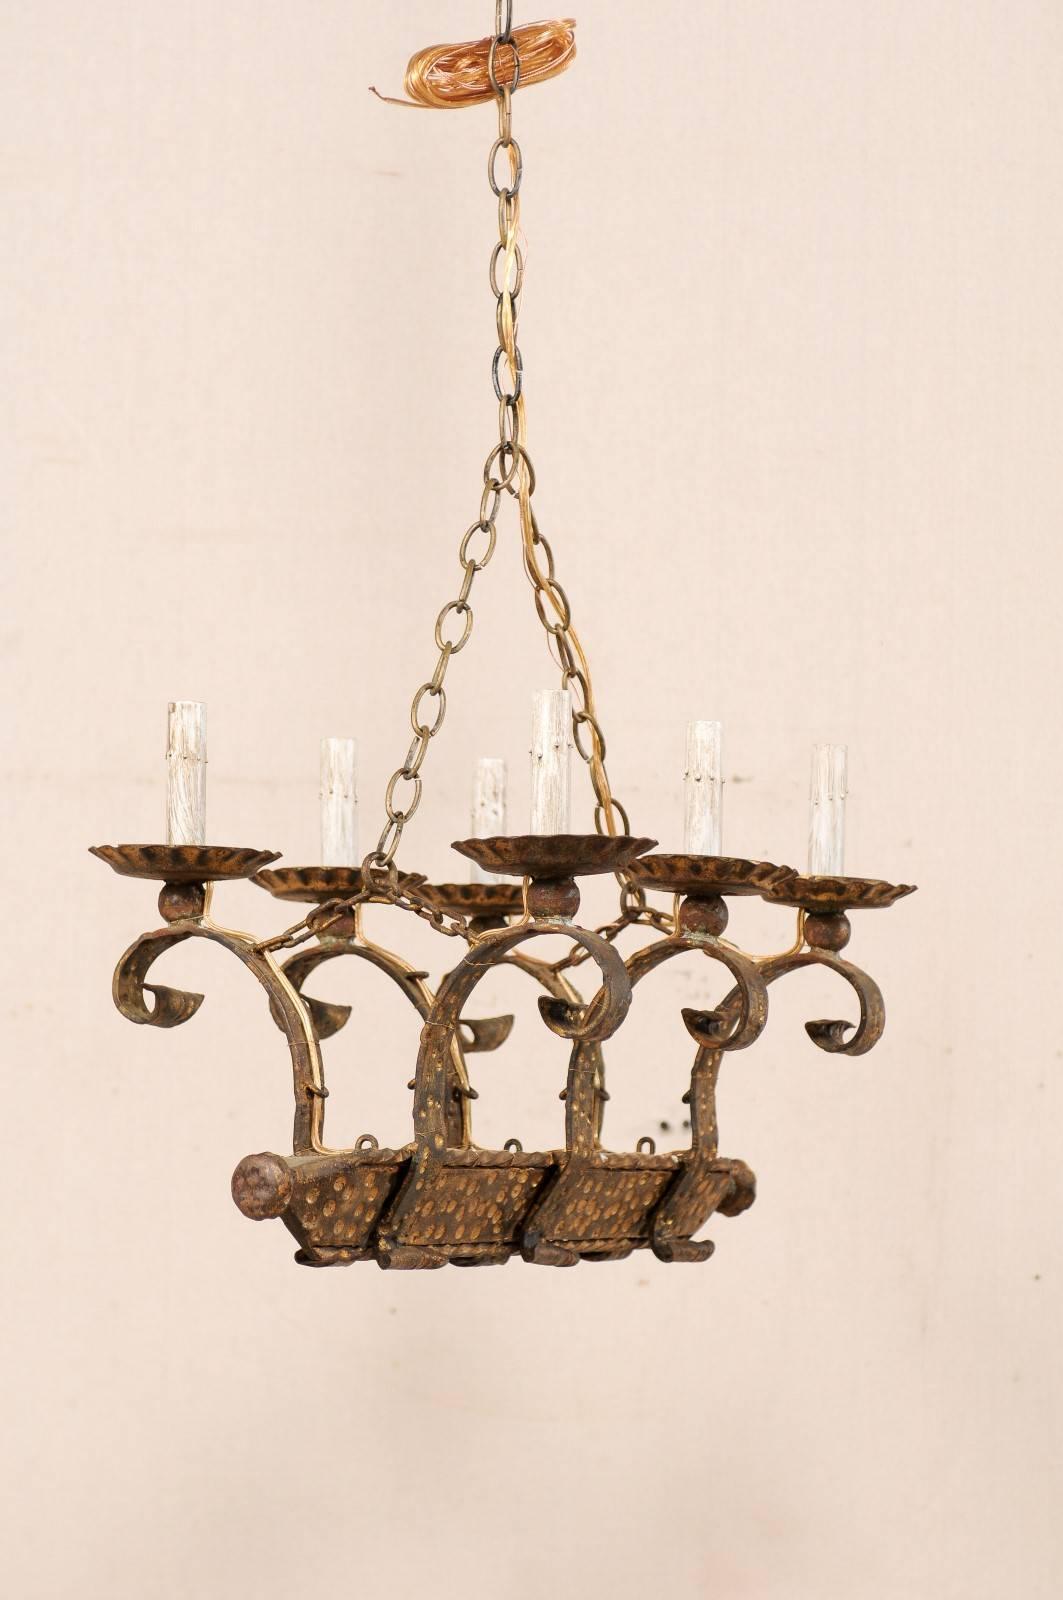 French Six-Light Forged and Hammered Iron Chandelier in Gold Colored Finish In Good Condition For Sale In Atlanta, GA